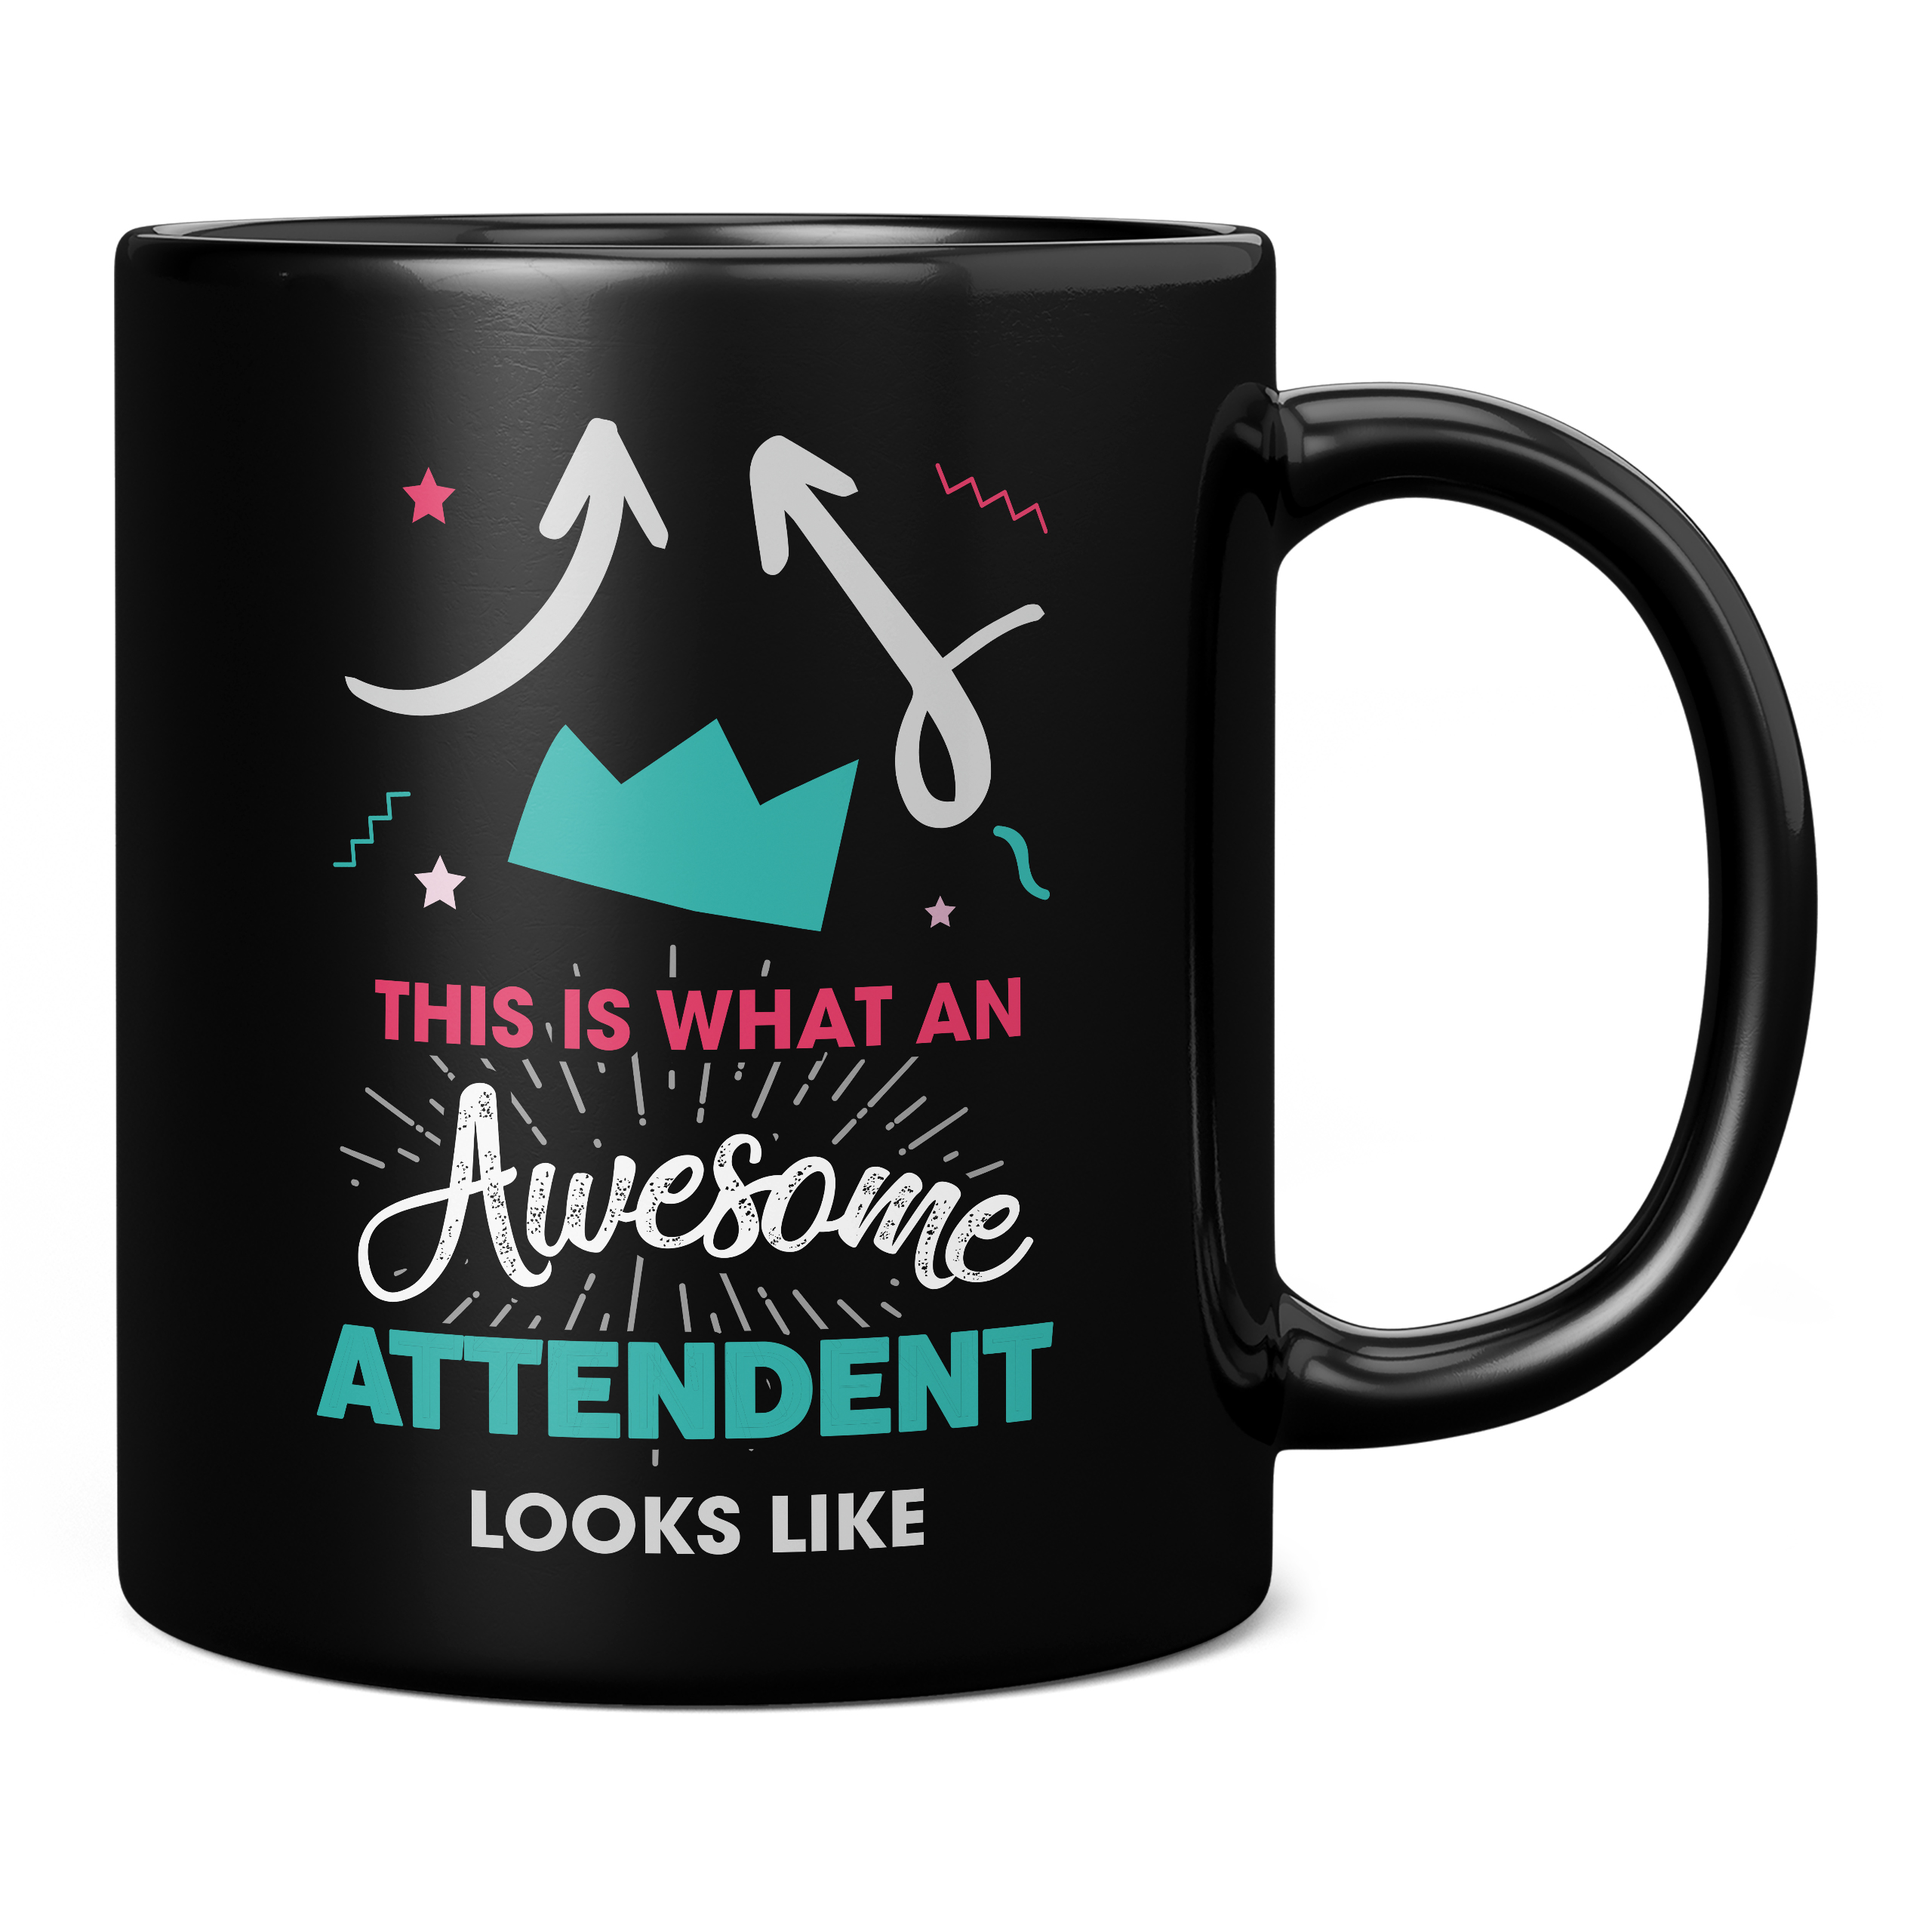 THIS IS WHAT AN AWESOME ATTENDENT LOOKS LIKE 11OZ NOVELTY MUG